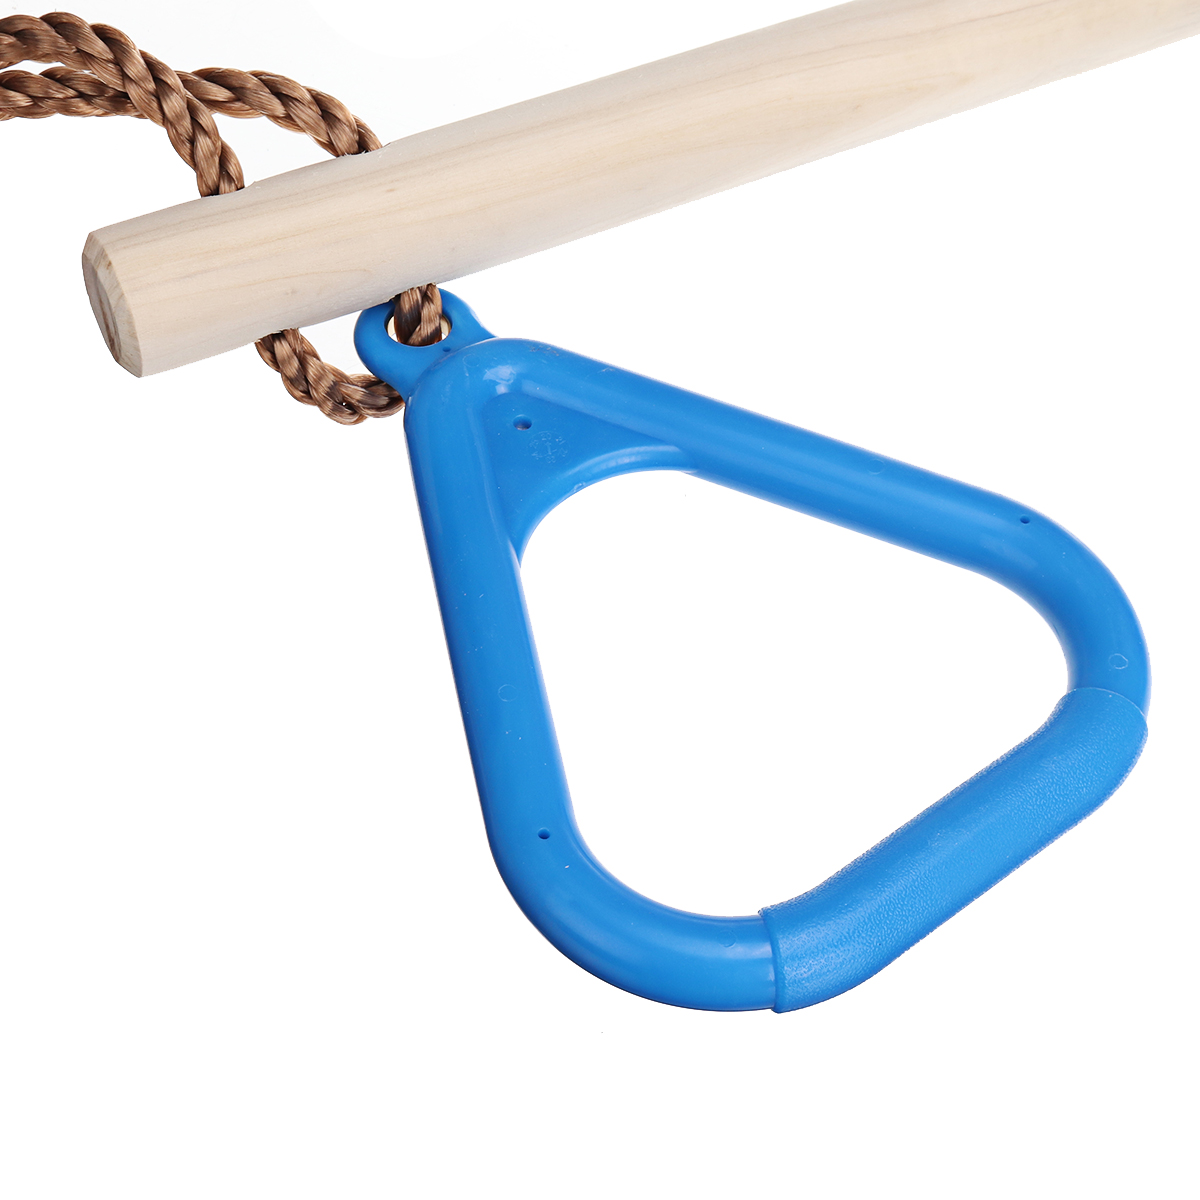 Wooden-Hand-Rings-Climbing-Swing-Seat-Toy-Outdoor-Sports-Fitness-Children-Supplies-Disc-Monkey-Kids--1795979-7